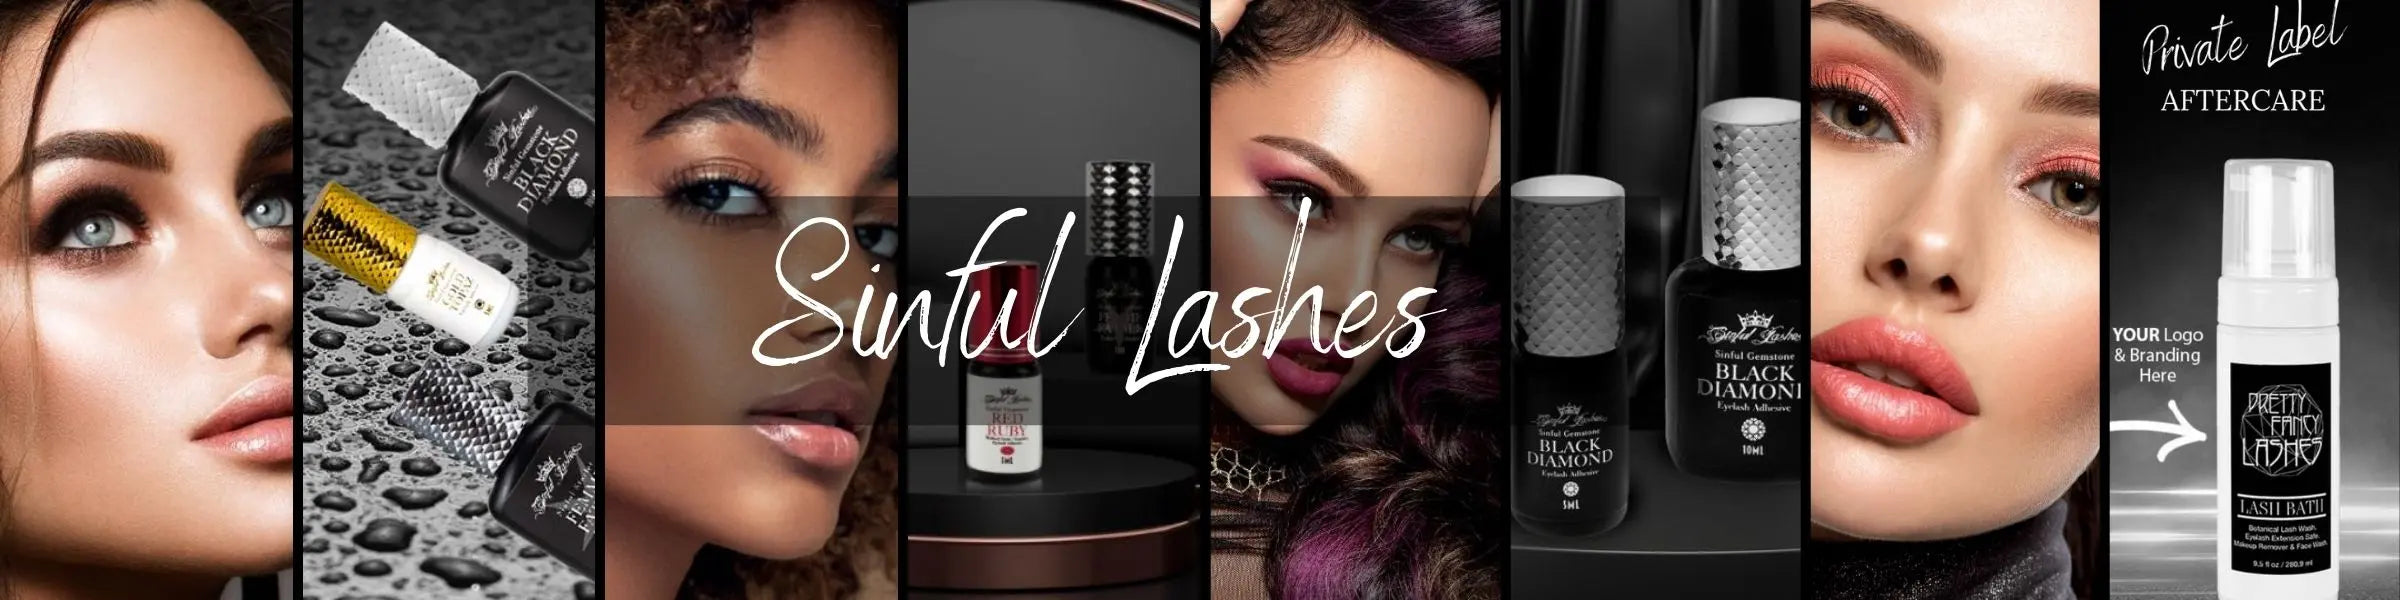 Eyelash Extension Supplies & Courses Sinful Lashes 